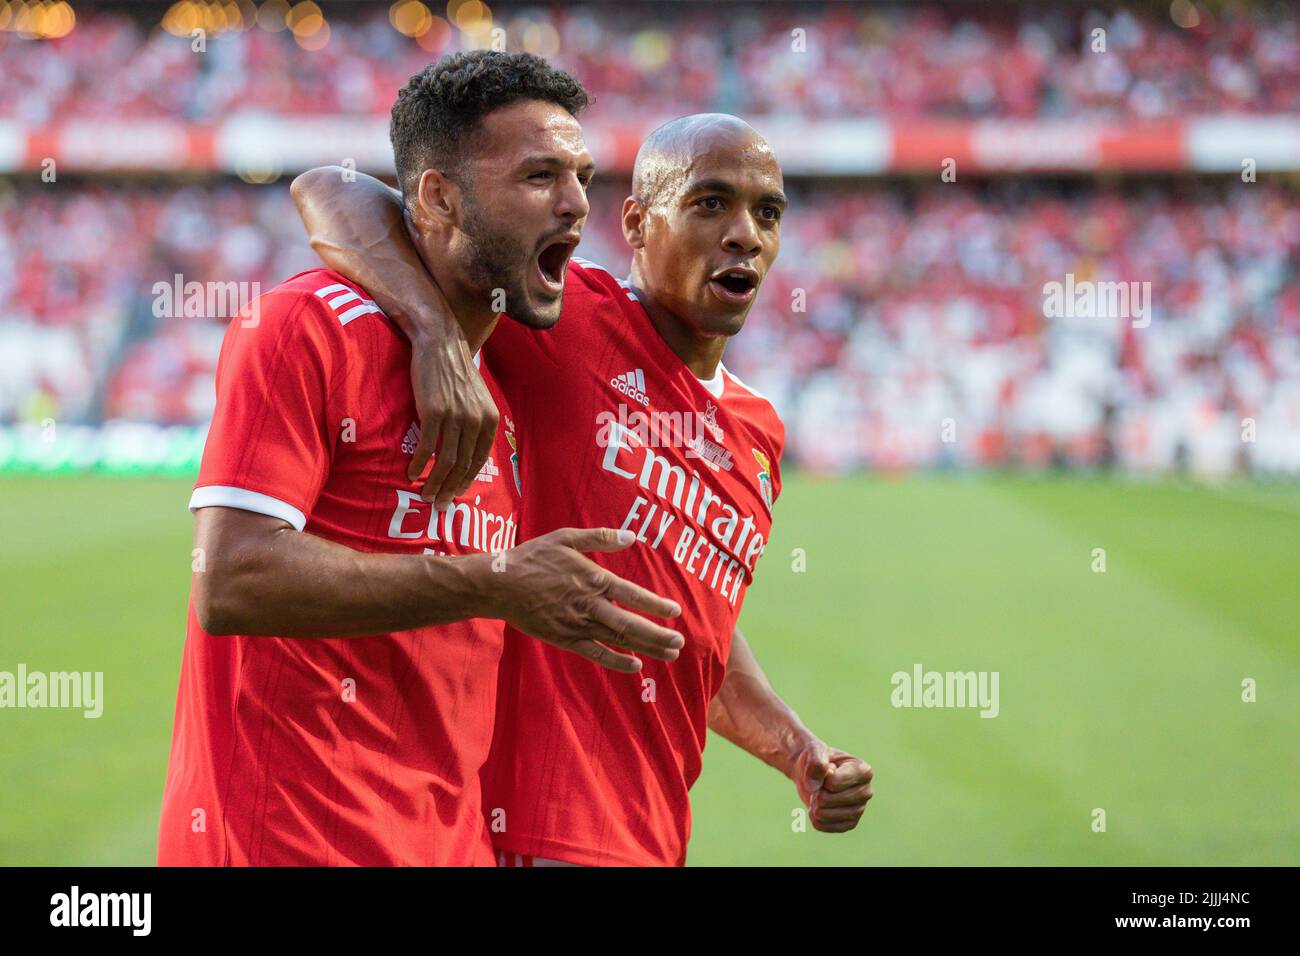 Lisbon, Portugal. July 26, 2022.  Benfica's forward from Portugal Goncalo Ramos (88) celebrating with Benfica's midfielder from Portugal Joao Mario (20) after scoring a goal during the friendly game between SL Benfica vs Newcastle United FC Credit: Alexandre de Sousa/Alamy Live News Stock Photo